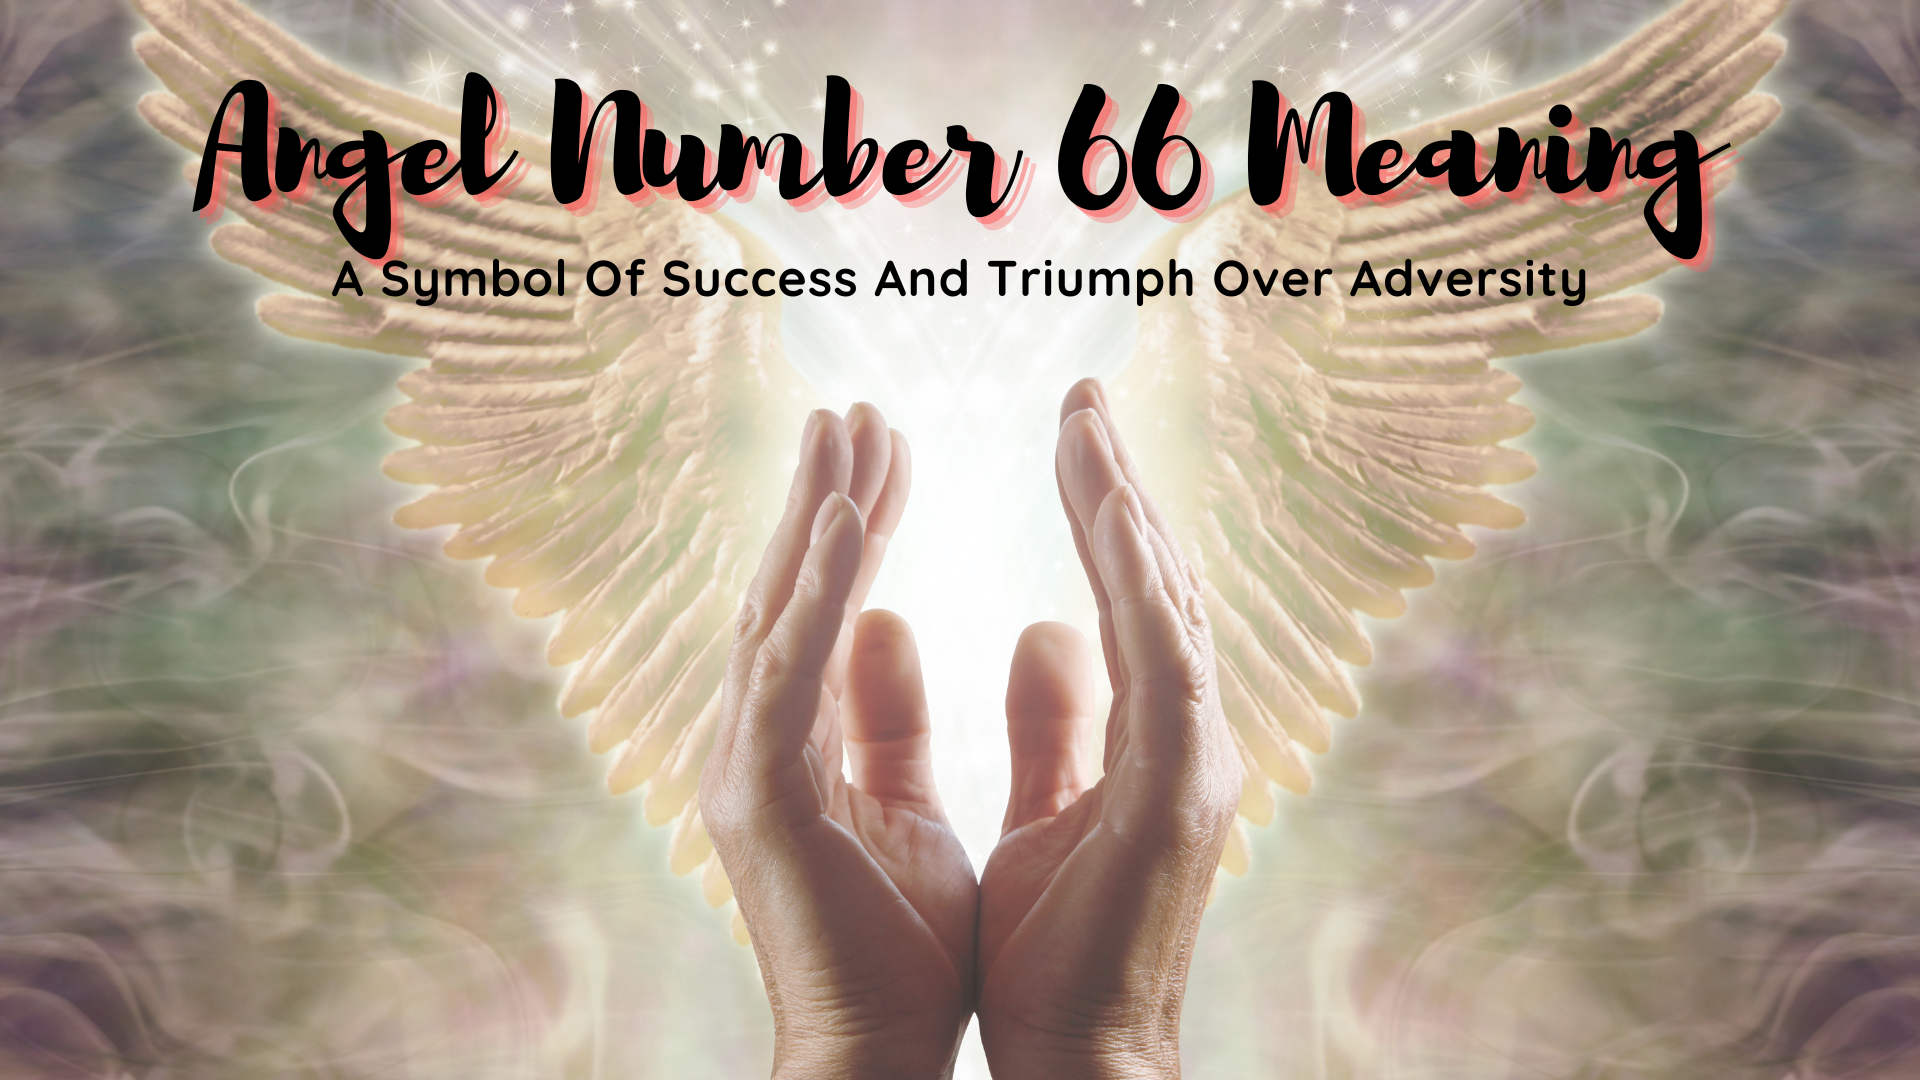 Angel Number 66 Meaning - A Symbol Of Success And Triumph Over Adversity